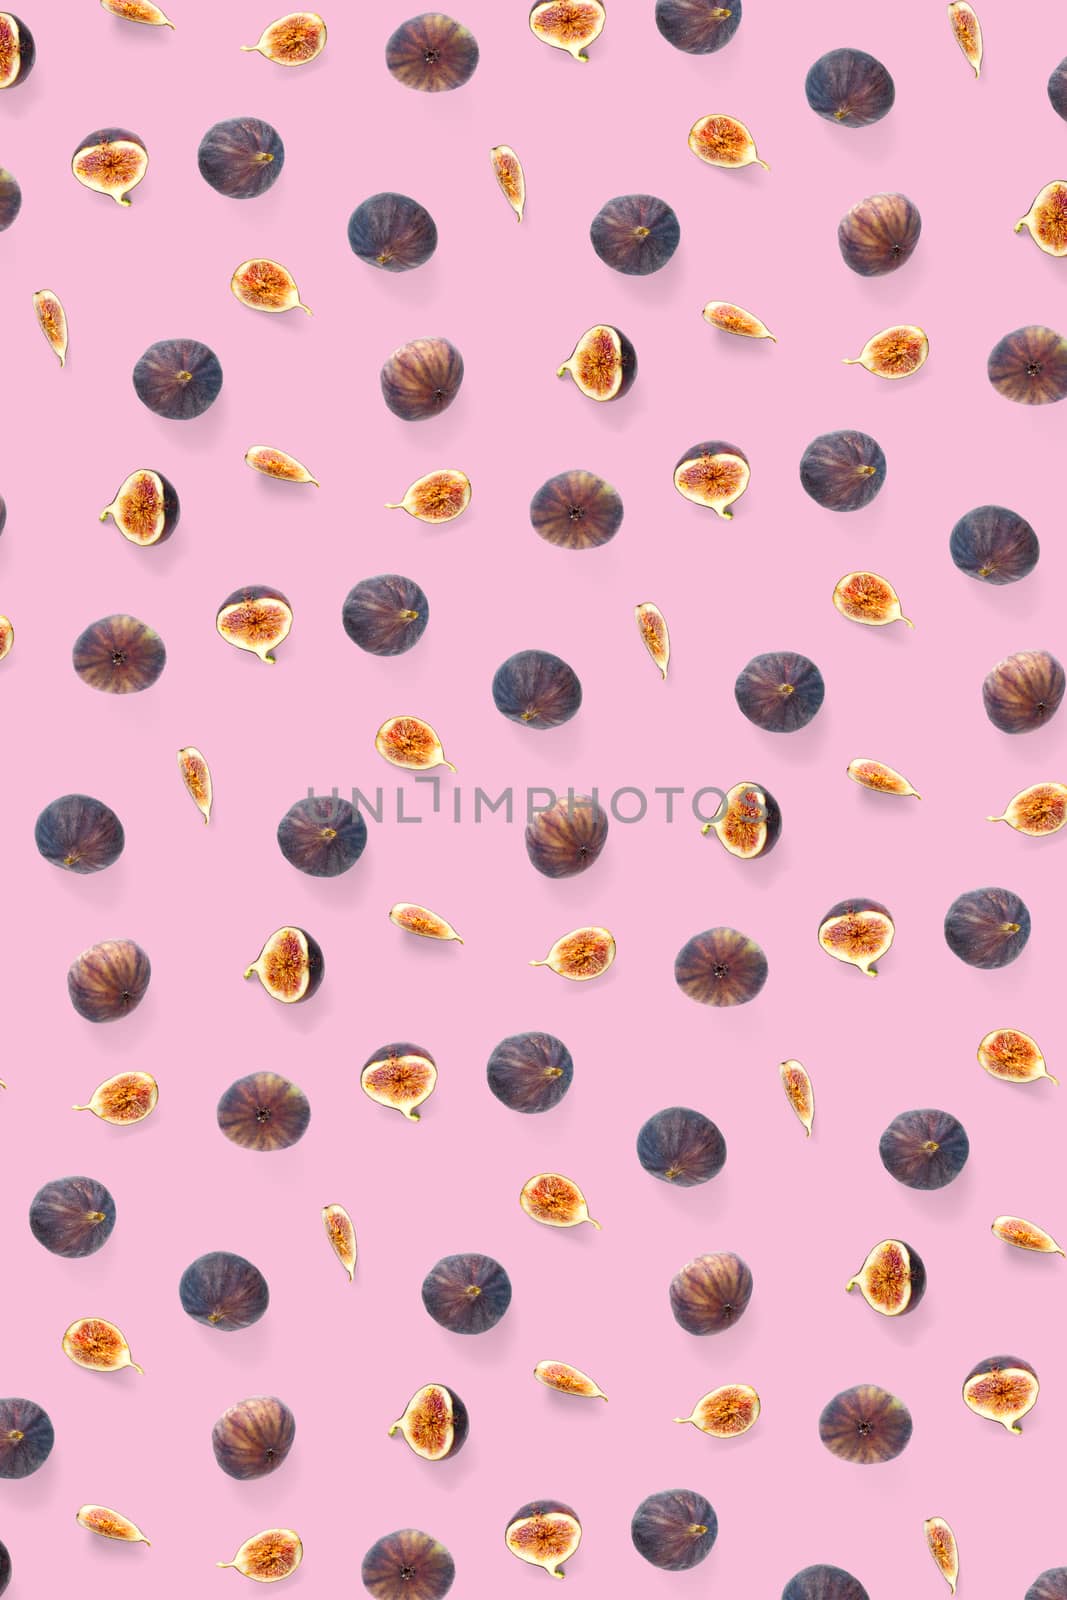 Background from Fresh figs. Food Photo. Modern fig fruits background. Creative set of the whole and sliced figs on a pink background, not pattern